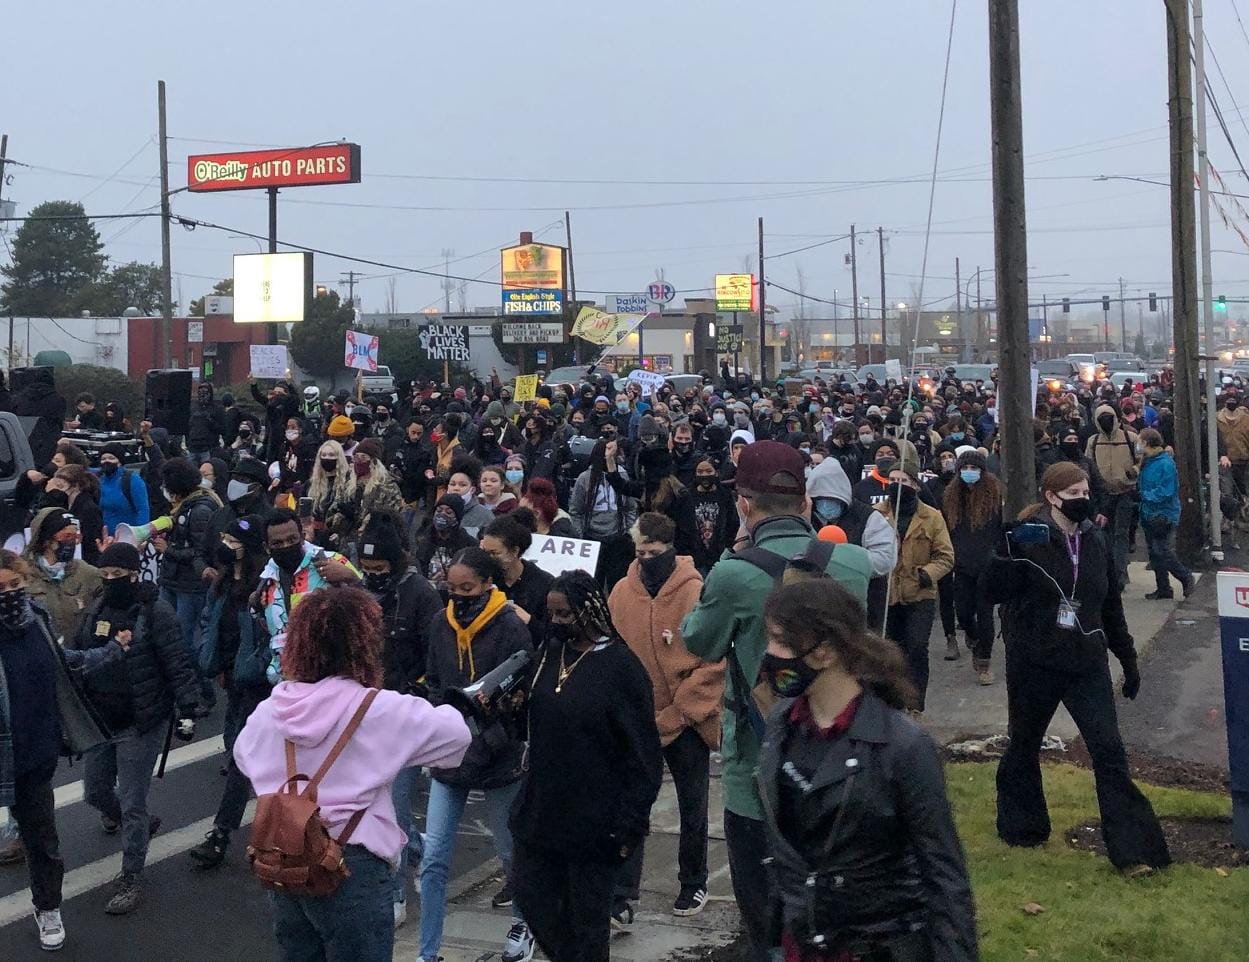 A few hundred protesters march down Highway 99 in Hazel Dell, the latest in a string of demonstrations since Kevin E. Peterson Jr. was fatally shot by police on Oct. 29.